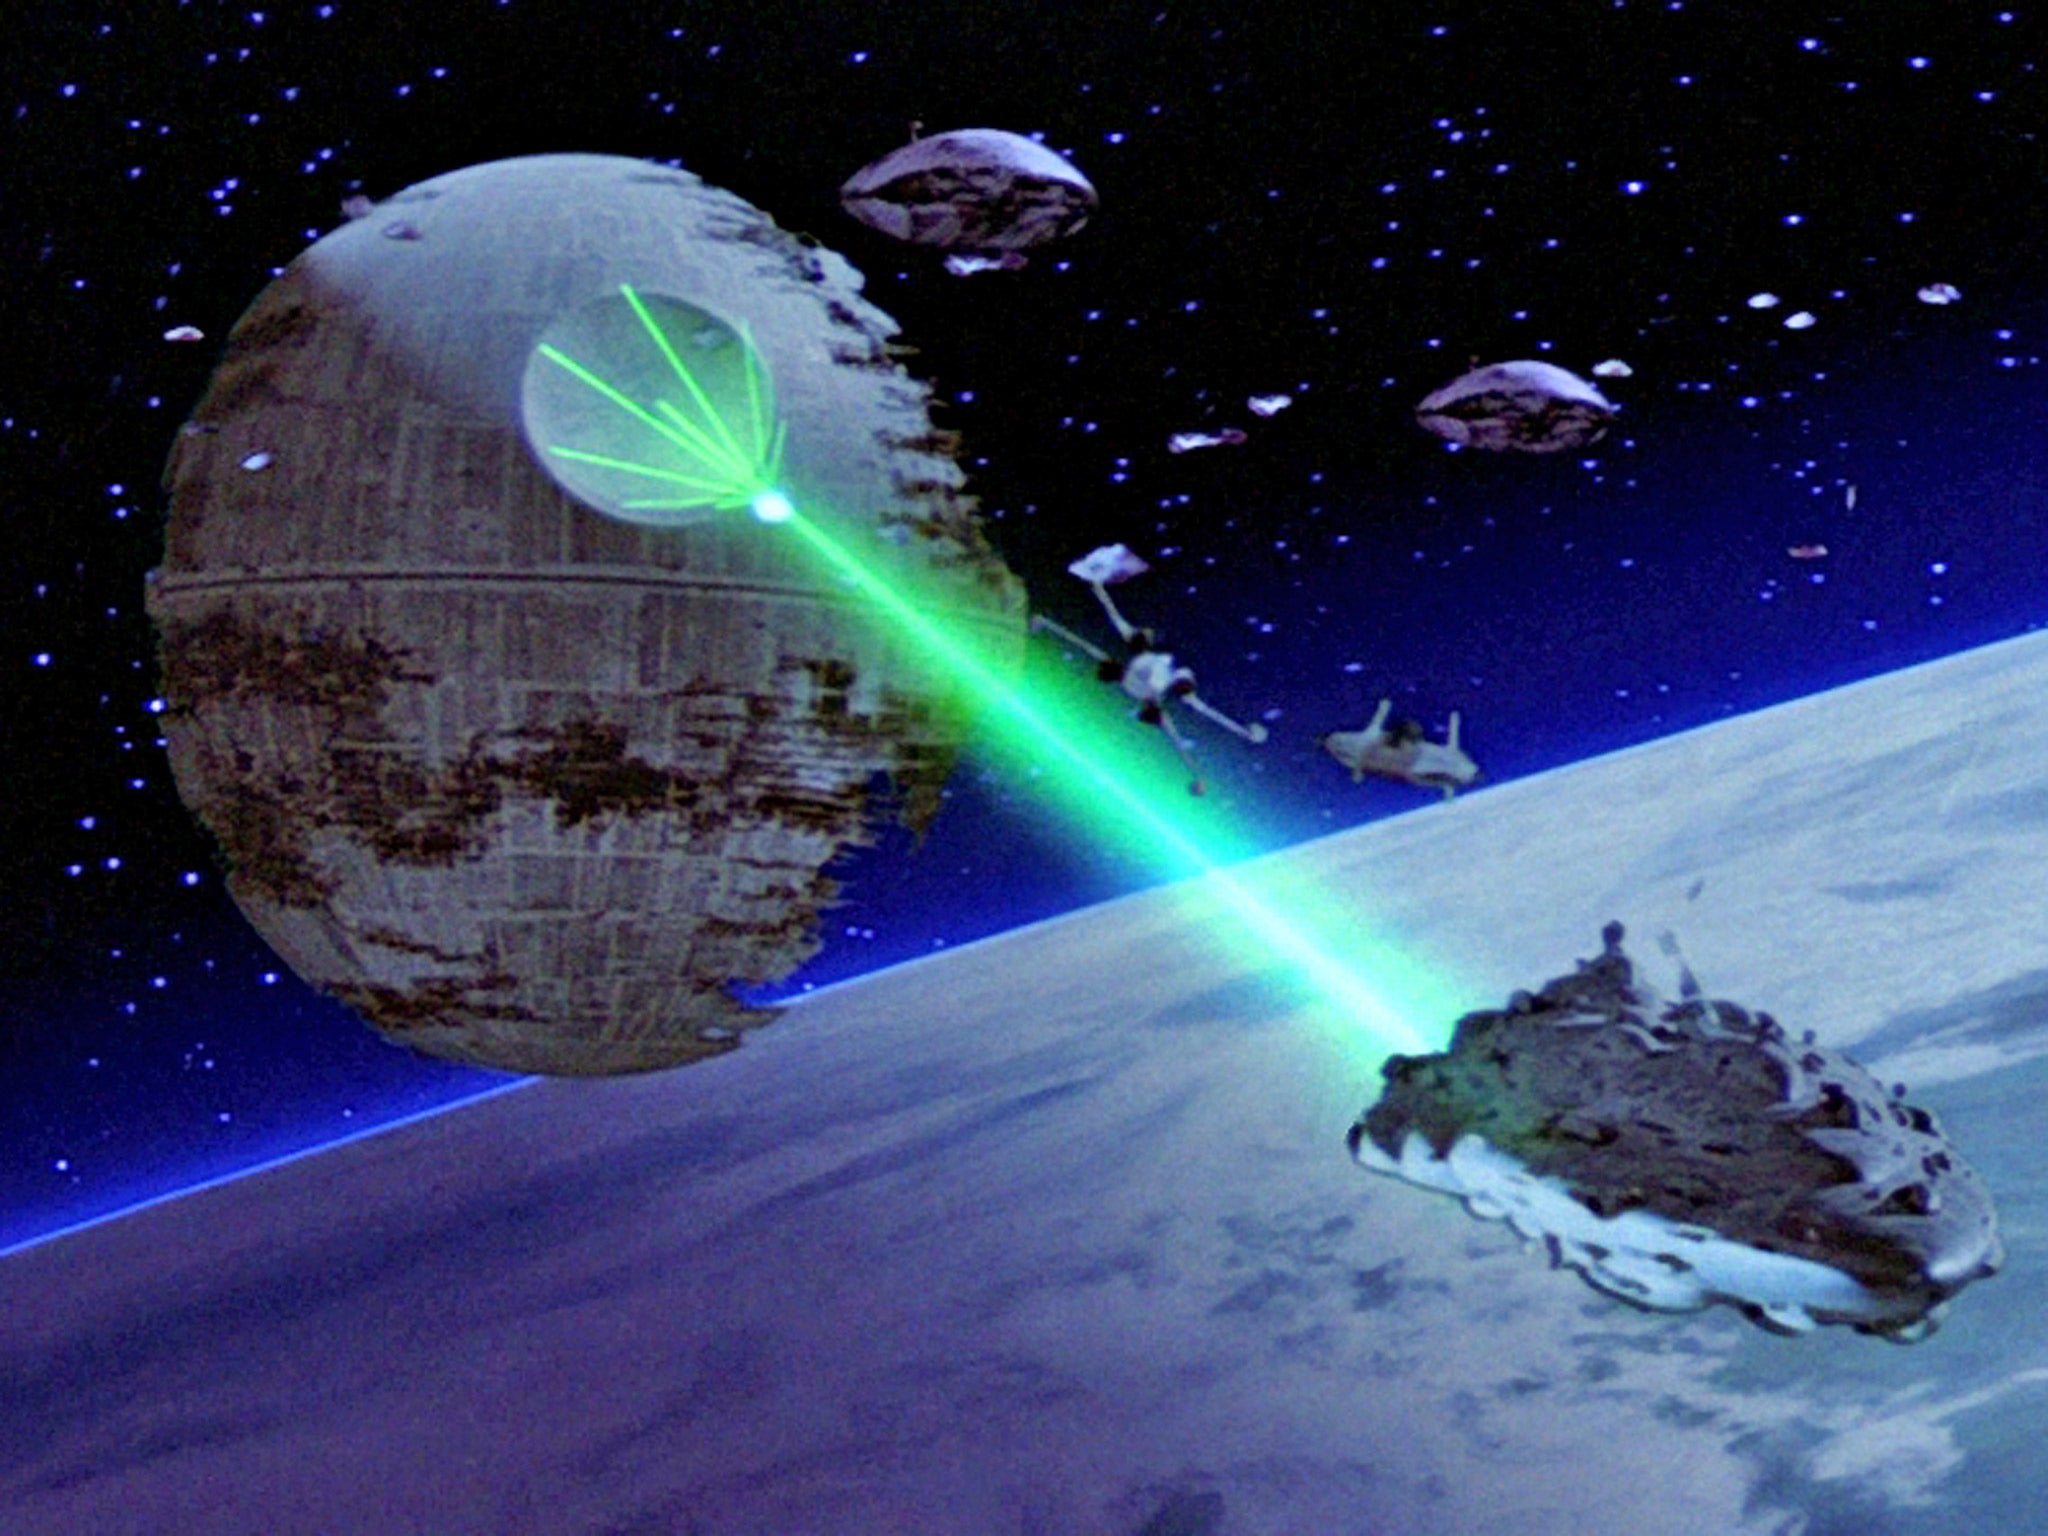 The Death Star fires its laser in 'Star Wars: Return of the Jedi'